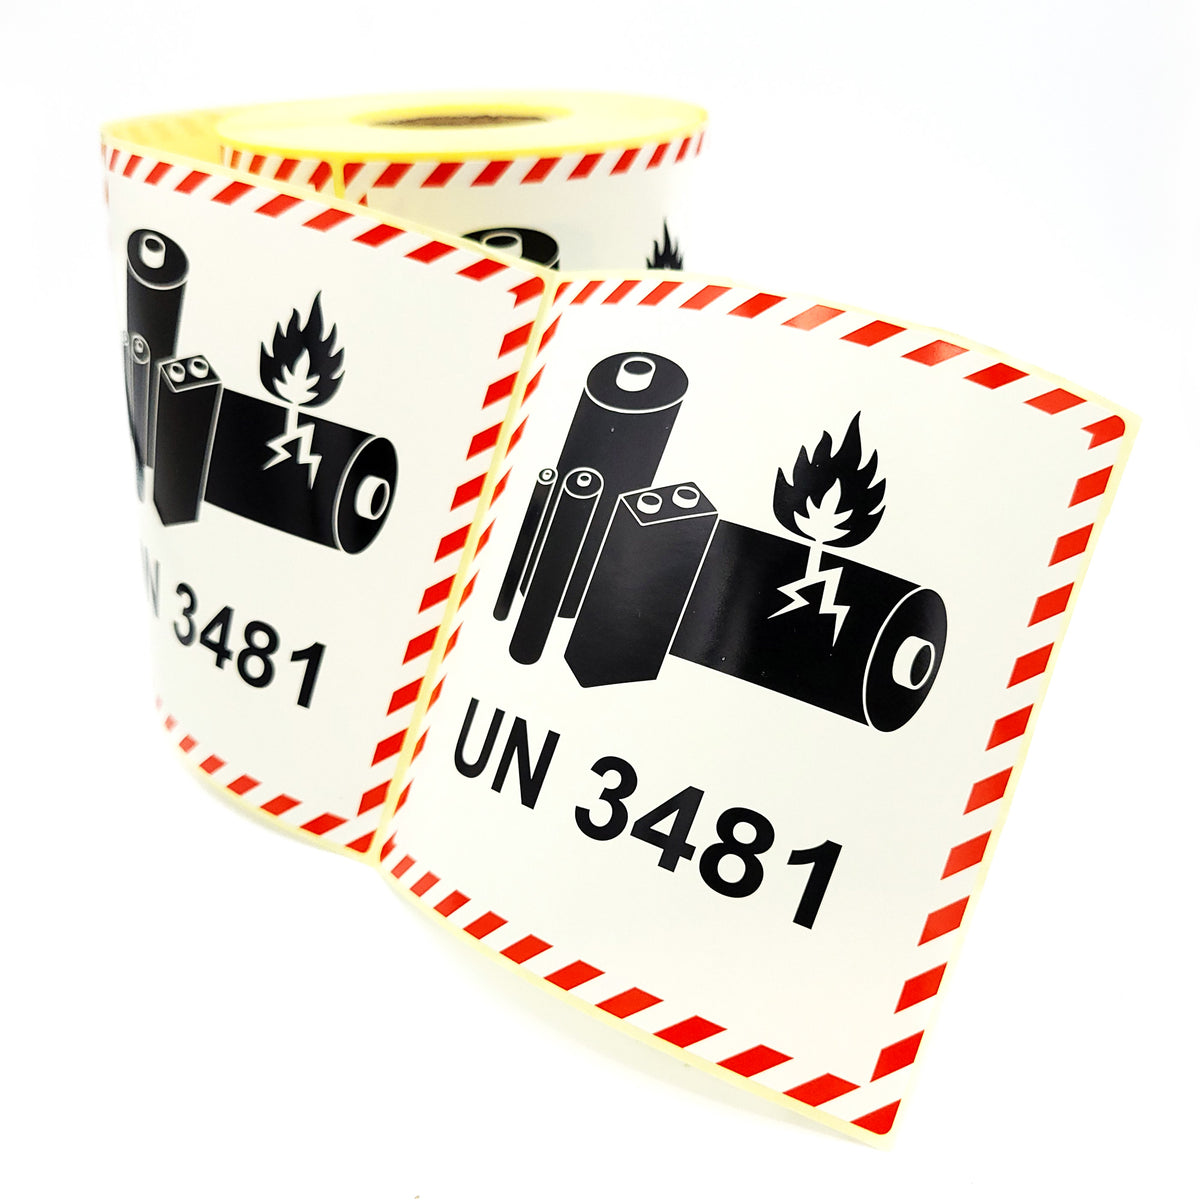 Warning labels Lithium Ion Battery UN3481 100x100 500 per roll